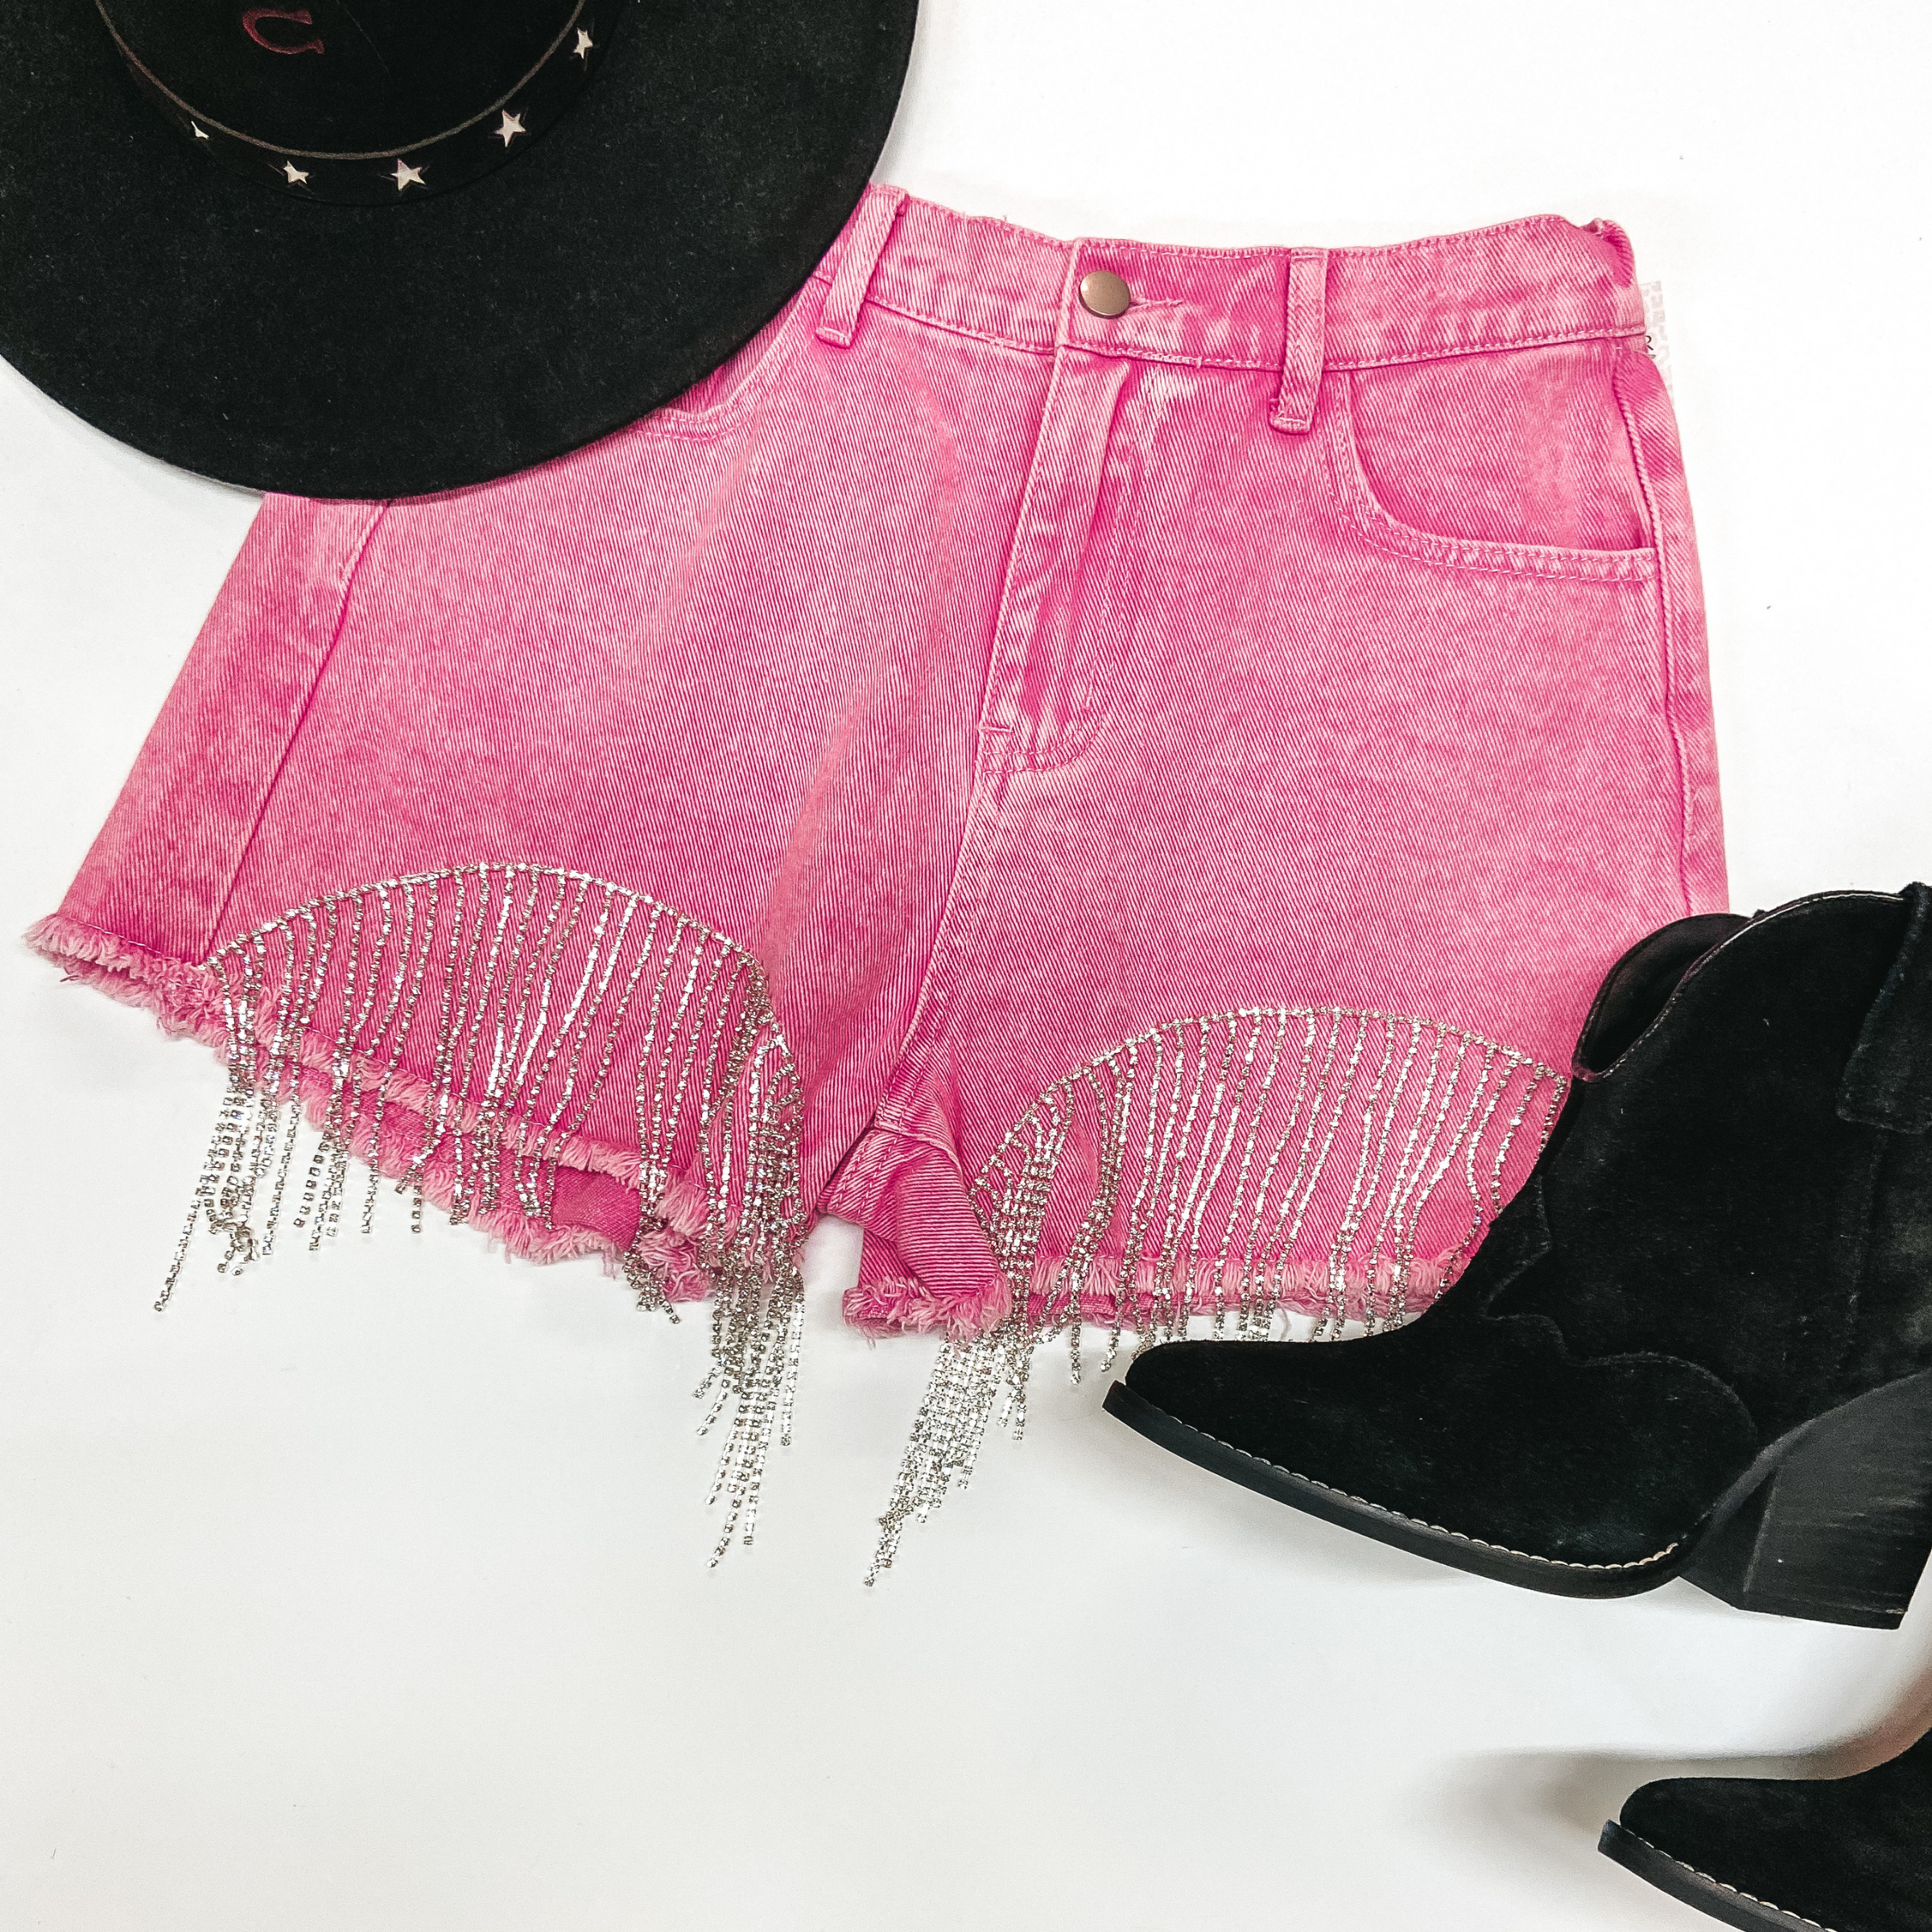 Pink denim shorts with crystal fringe on the bottom on a white background. Paired with a black Charlie 1 Horse hat in the top left and black booties on the bottom right.